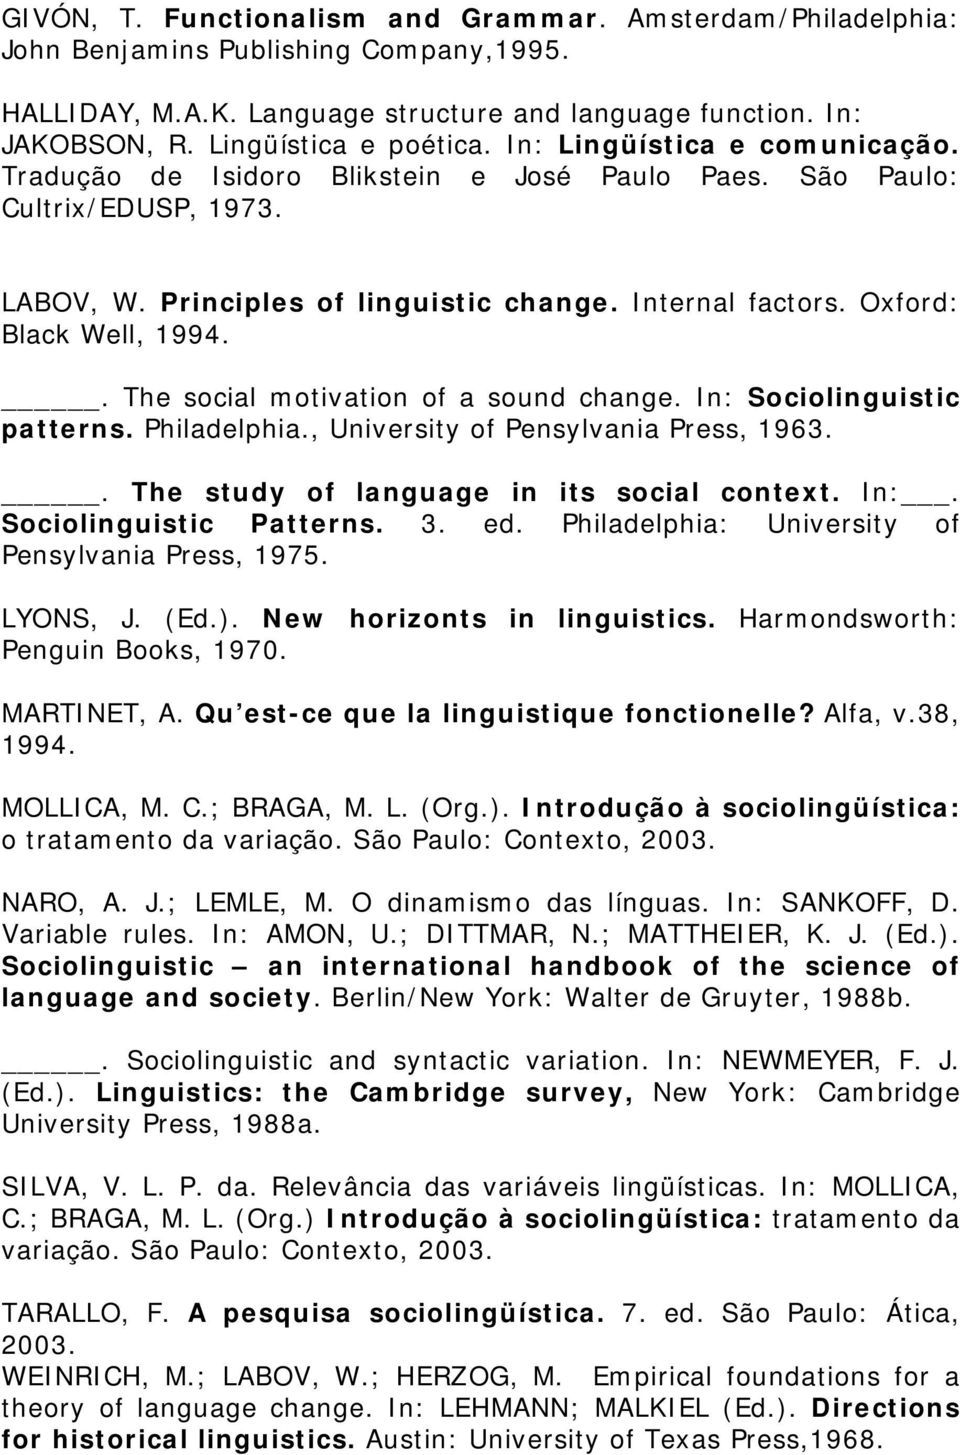 . The social motivation of a sound change. In: Sociolinguistic patterns. Philadelphia., University of Pensylvania Press, 1963.. The study of language in its social context. In:. Sociolinguistic Patterns.